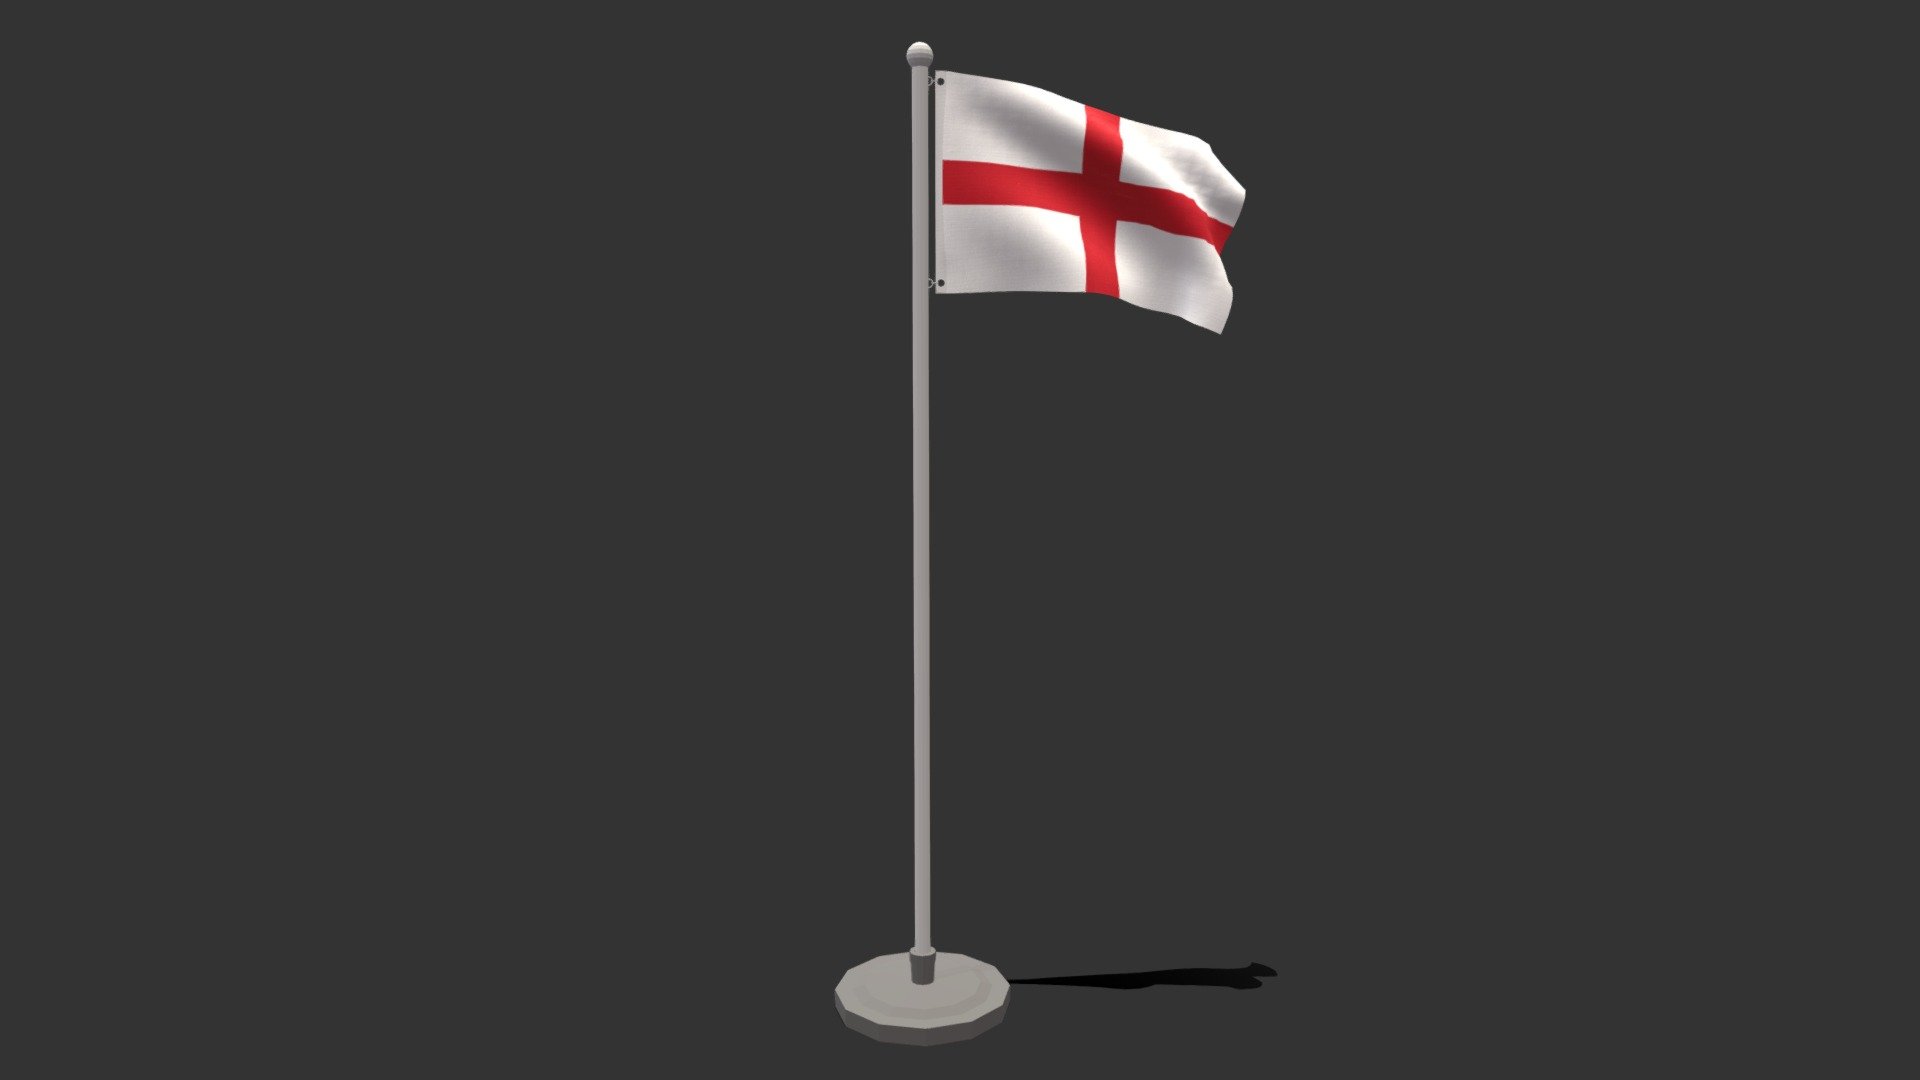 This is a low poly 3D model of an animated flag of England. The low poly flag was modeled and prepared for low-poly style renderings, background, general CG visualization presented as 2 meshes with quads only.

Verts : 1.416 Faces : 1.343.

1024x1024 textures included. Diffuse, roughness and normal maps available only for flag. The pole have simple materials with colors.

The animation is based on shapekeys, 248 frames and seamless, no rig included.

The original file was created in blender. You will receive a OBJ, FBX, blend, DAE, Stl, gLTF, abc.

****PLEASE NOTE Animation icluded only in blend, abc and glTF files.

Warning: Depending on which software package you are using, the exchange formats (.obj , .dae, .fbx) may not match the preview images exactly. Due to the nature of these formats, there may be some textures that have to be loaded by hand and possibly triangulated geometry 3d model